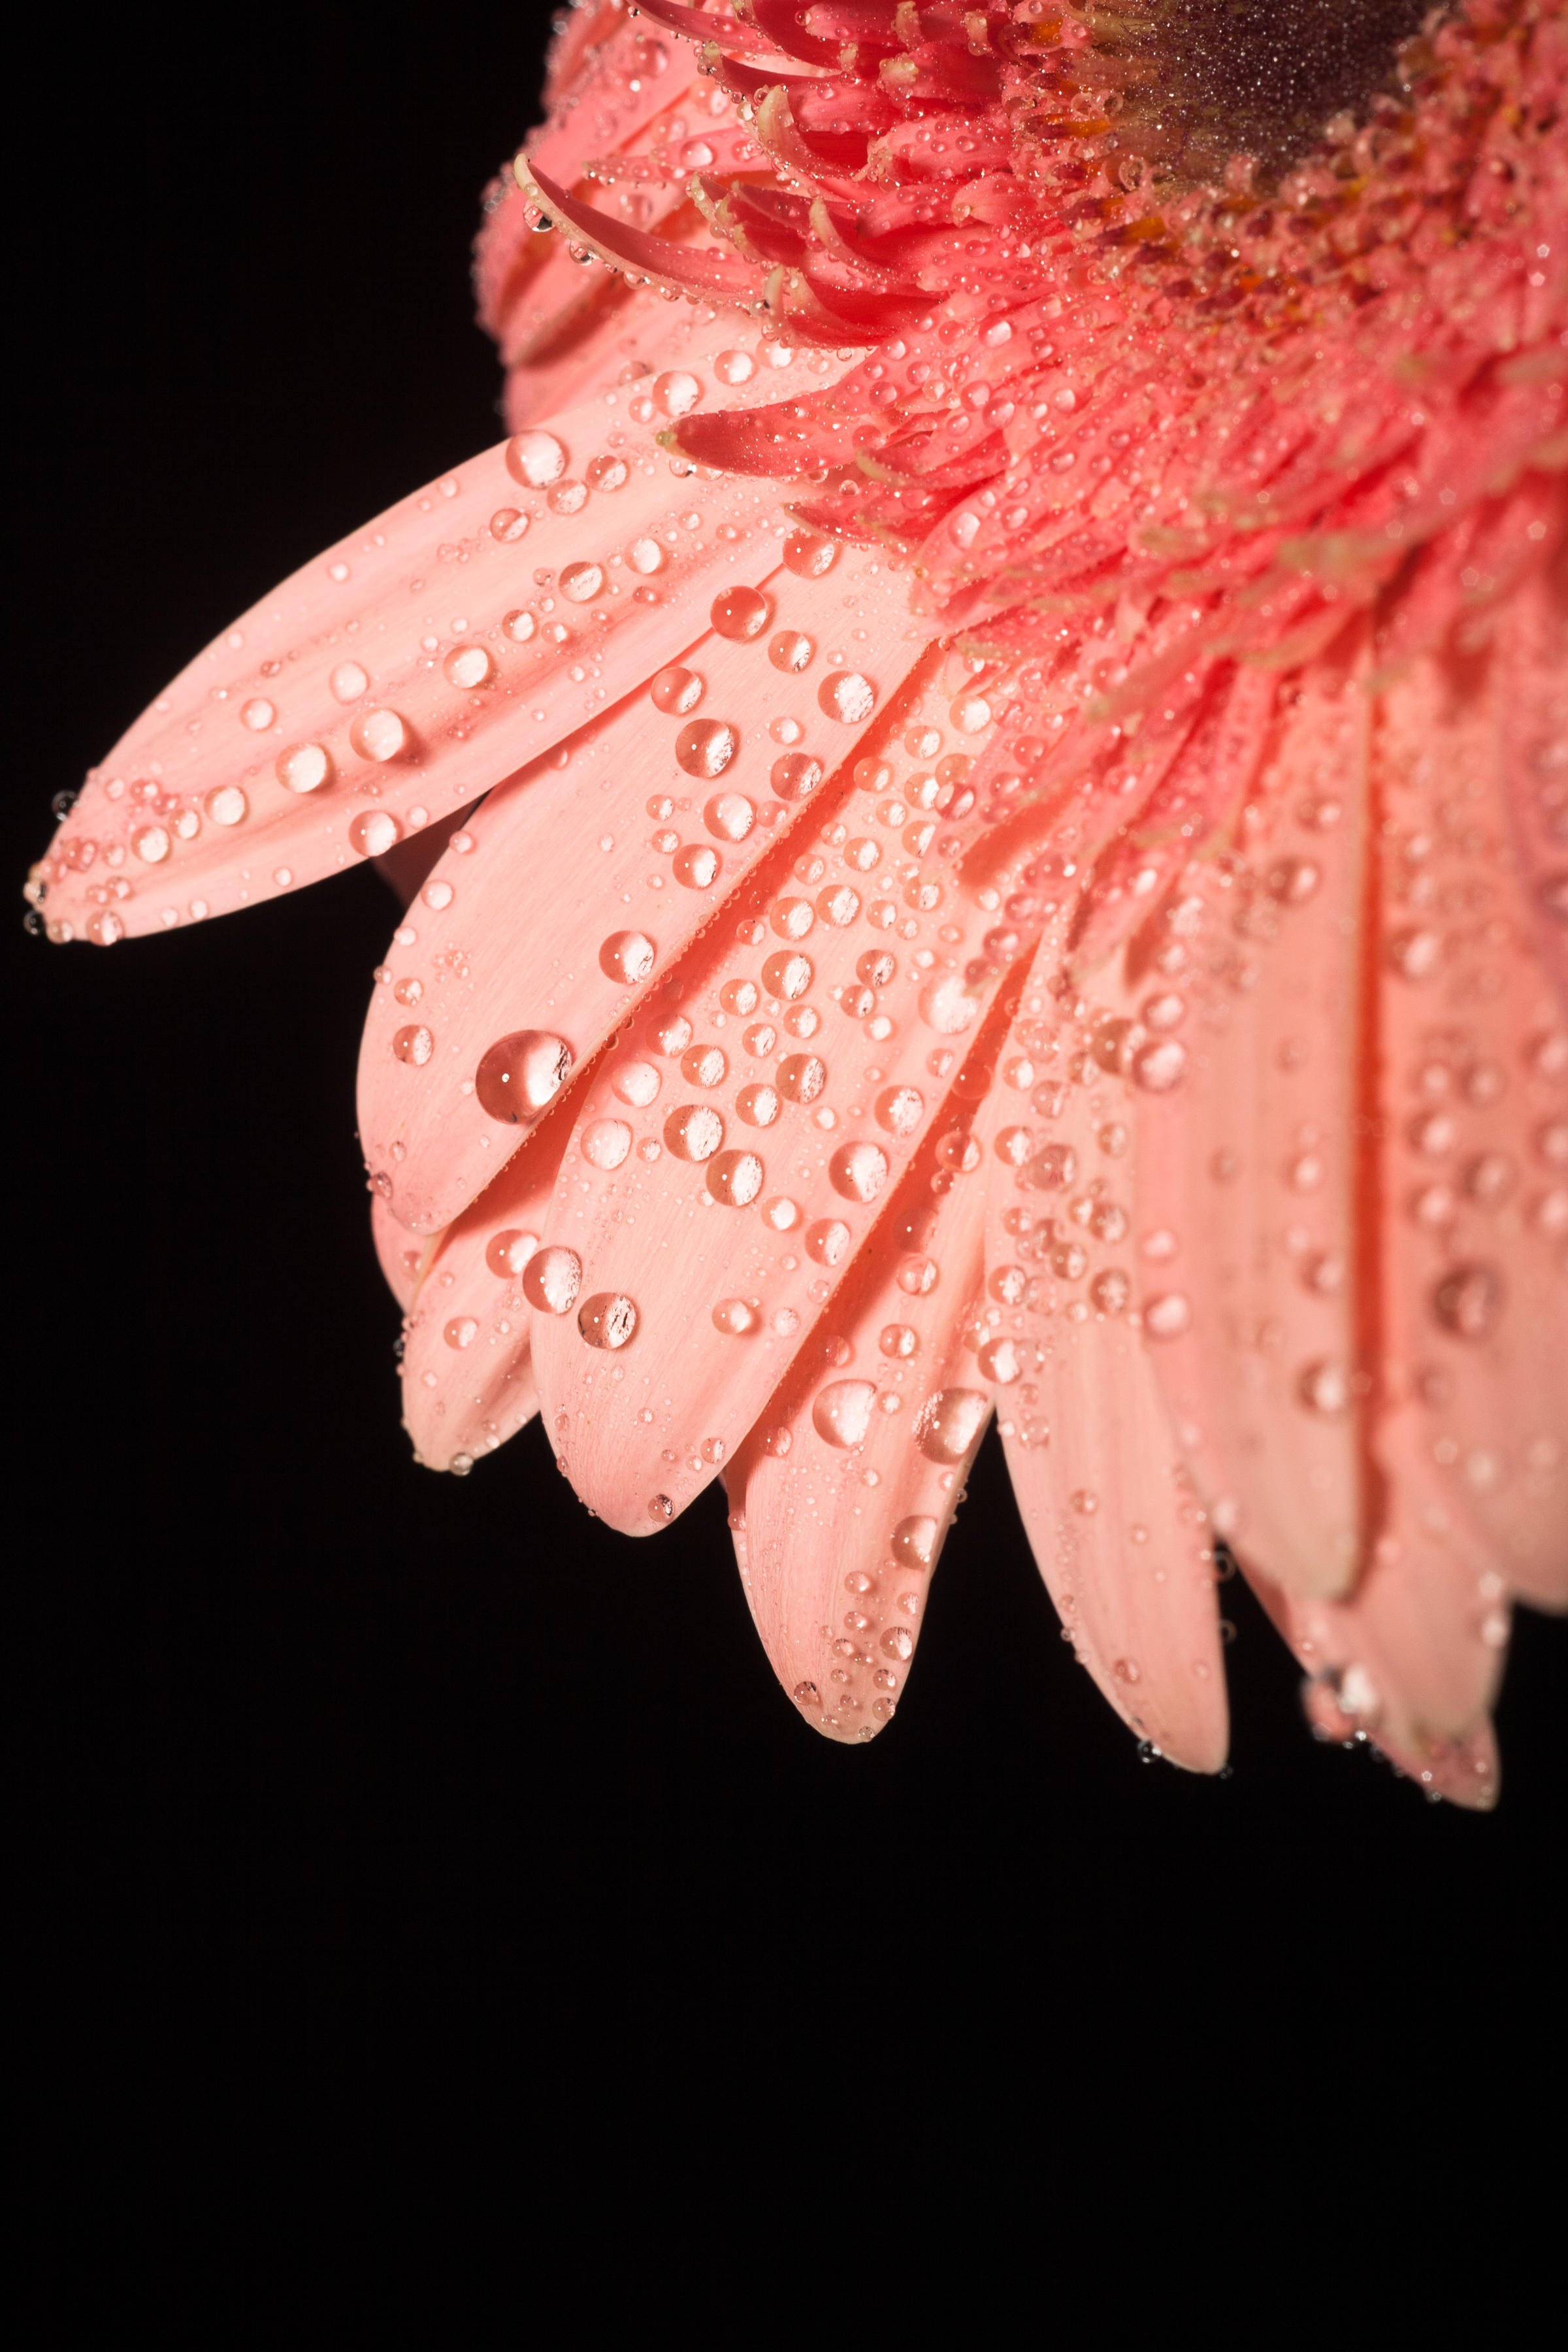 Water drops on flower petals photo